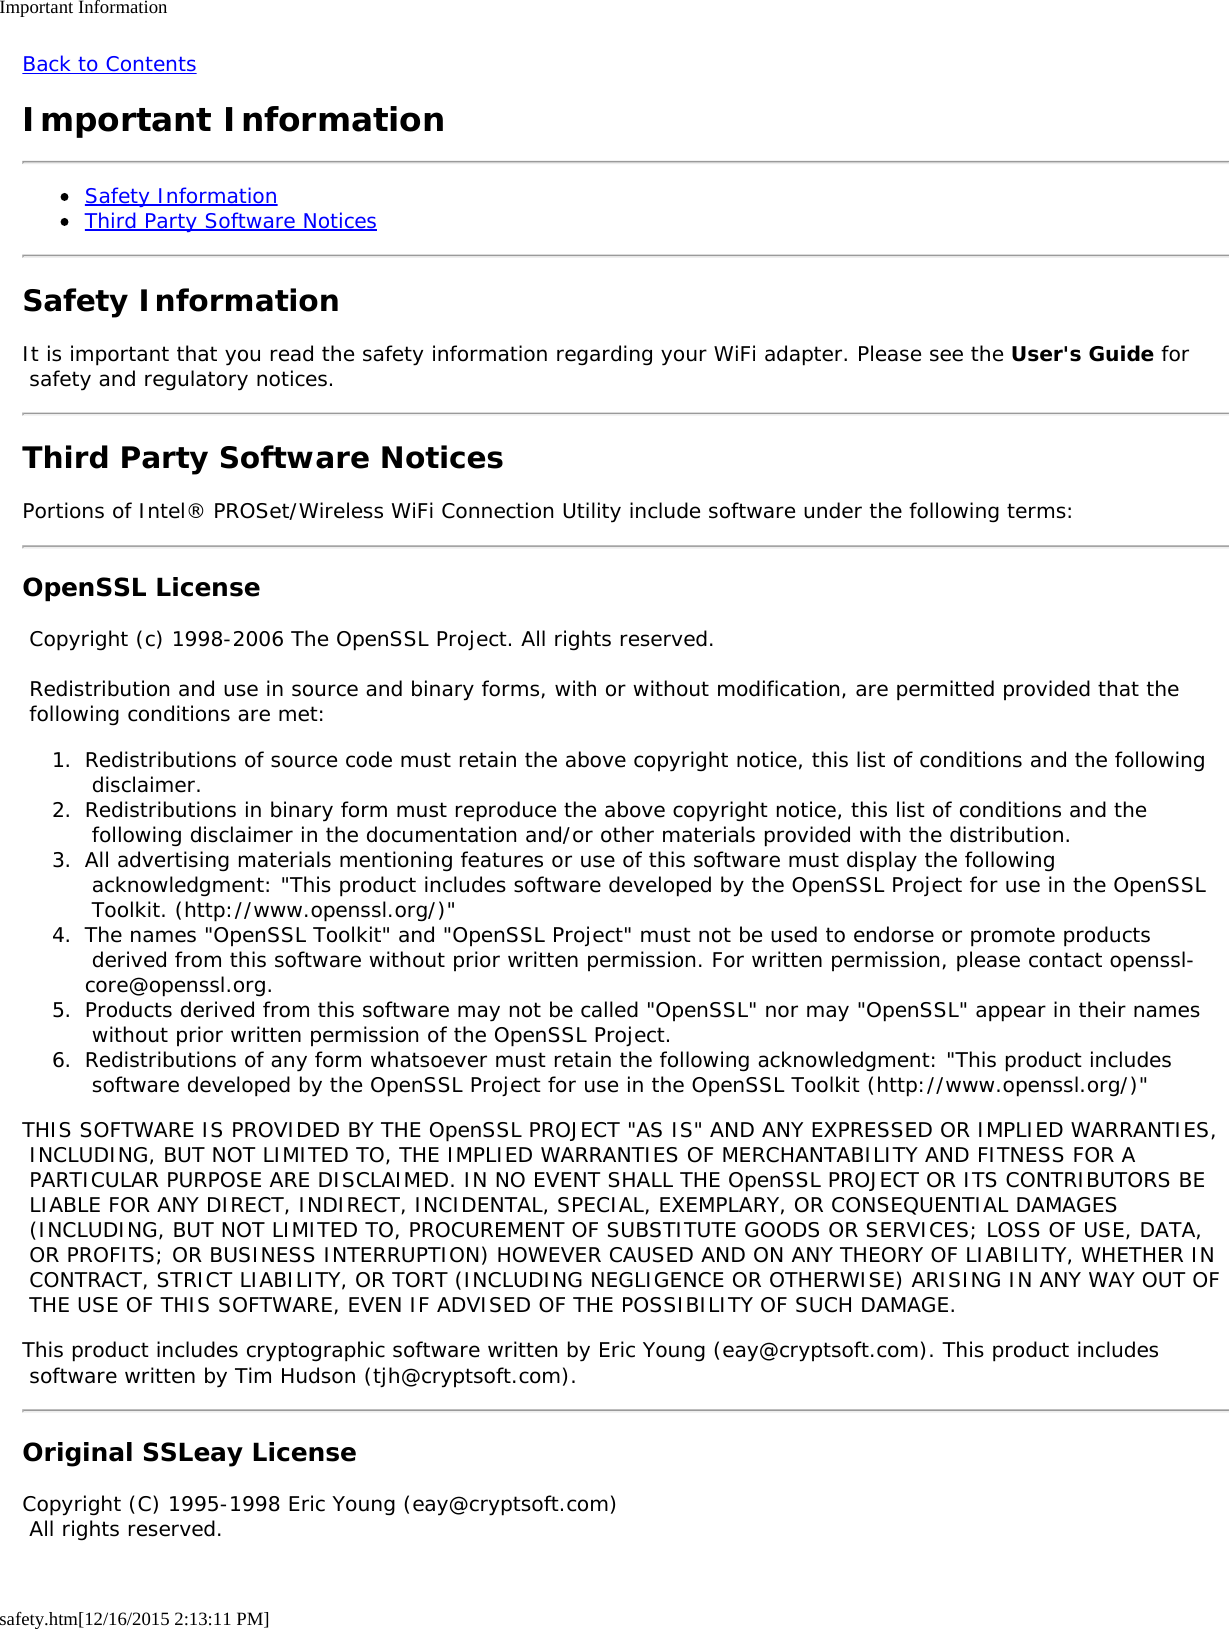 Important Informationsafety.htm[12/16/2015 2:13:11 PM]Back to ContentsImportant InformationSafety InformationThird Party Software NoticesSafety InformationIt is important that you read the safety information regarding your WiFi adapter. Please see the User&apos;s Guide for safety and regulatory notices.Third Party Software NoticesPortions of Intel® PROSet/Wireless WiFi Connection Utility include software under the following terms:OpenSSL License Copyright (c) 1998-2006 The OpenSSL Project. All rights reserved. Redistribution and use in source and binary forms, with or without modification, are permitted provided that the following conditions are met:1.  Redistributions of source code must retain the above copyright notice, this list of conditions and the following disclaimer.2.  Redistributions in binary form must reproduce the above copyright notice, this list of conditions and the following disclaimer in the documentation and/or other materials provided with the distribution.3.  All advertising materials mentioning features or use of this software must display the following acknowledgment: &quot;This product includes software developed by the OpenSSL Project for use in the OpenSSL Toolkit. (http://www.openssl.org/)&quot;4.  The names &quot;OpenSSL Toolkit&quot; and &quot;OpenSSL Project&quot; must not be used to endorse or promote products derived from this software without prior written permission. For written permission, please contact openssl-core@openssl.org.5.  Products derived from this software may not be called &quot;OpenSSL&quot; nor may &quot;OpenSSL&quot; appear in their names without prior written permission of the OpenSSL Project.6.  Redistributions of any form whatsoever must retain the following acknowledgment: &quot;This product includes software developed by the OpenSSL Project for use in the OpenSSL Toolkit (http://www.openssl.org/)&quot;THIS SOFTWARE IS PROVIDED BY THE OpenSSL PROJECT &quot;AS IS&quot; AND ANY EXPRESSED OR IMPLIED WARRANTIES, INCLUDING, BUT NOT LIMITED TO, THE IMPLIED WARRANTIES OF MERCHANTABILITY AND FITNESS FOR A PARTICULAR PURPOSE ARE DISCLAIMED. IN NO EVENT SHALL THE OpenSSL PROJECT OR ITS CONTRIBUTORS BE LIABLE FOR ANY DIRECT, INDIRECT, INCIDENTAL, SPECIAL, EXEMPLARY, OR CONSEQUENTIAL DAMAGES (INCLUDING, BUT NOT LIMITED TO, PROCUREMENT OF SUBSTITUTE GOODS OR SERVICES; LOSS OF USE, DATA, OR PROFITS; OR BUSINESS INTERRUPTION) HOWEVER CAUSED AND ON ANY THEORY OF LIABILITY, WHETHER IN CONTRACT, STRICT LIABILITY, OR TORT (INCLUDING NEGLIGENCE OR OTHERWISE) ARISING IN ANY WAY OUT OF THE USE OF THIS SOFTWARE, EVEN IF ADVISED OF THE POSSIBILITY OF SUCH DAMAGE.This product includes cryptographic software written by Eric Young (eay@cryptsoft.com). This product includes software written by Tim Hudson (tjh@cryptsoft.com).Original SSLeay LicenseCopyright (C) 1995-1998 Eric Young (eay@cryptsoft.com) All rights reserved.